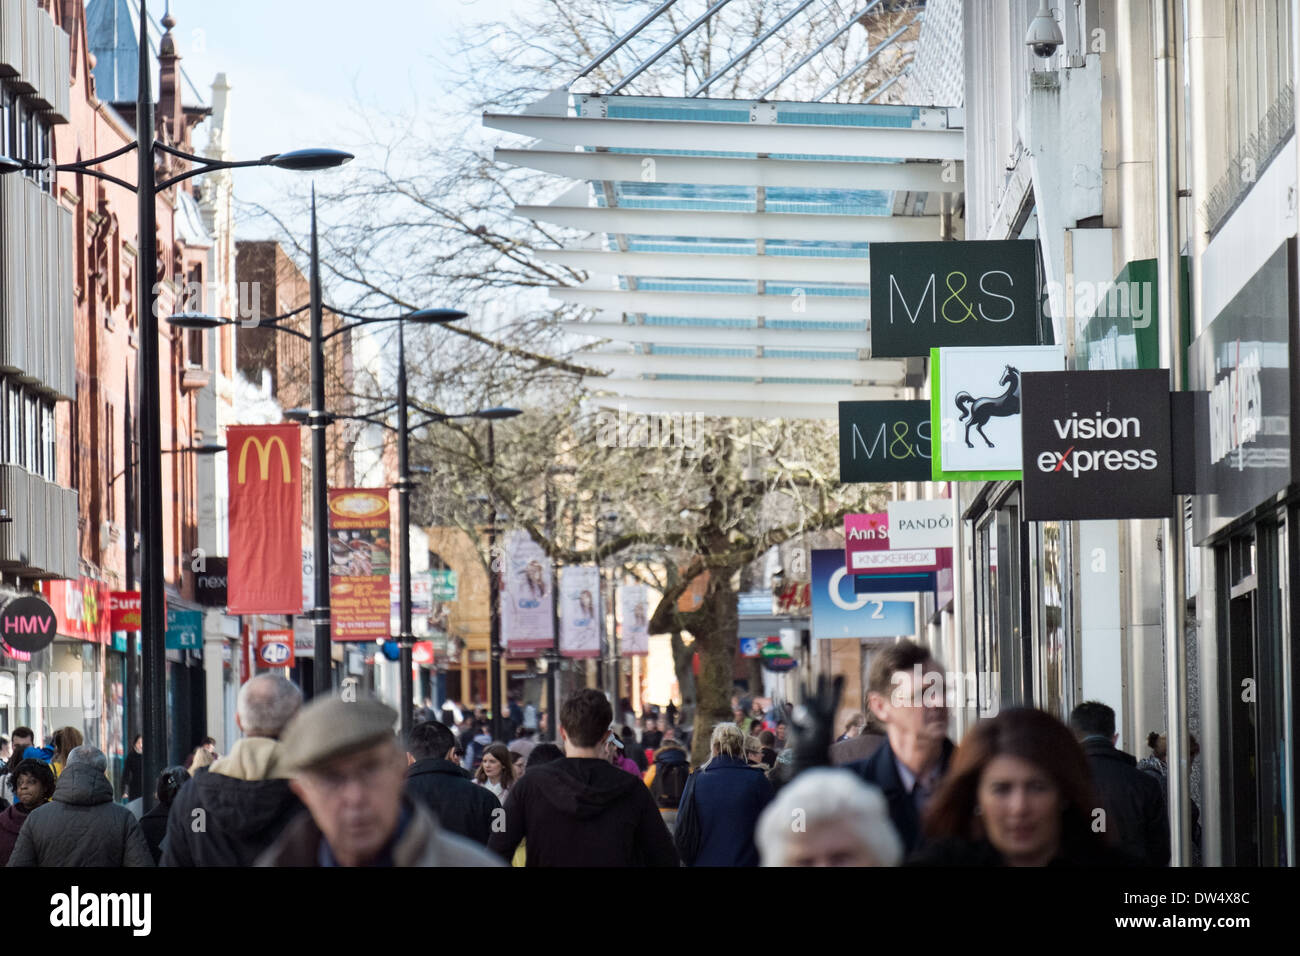 A view of the bustling town centre of Swindon in Wiltshire, UK Stock Photo